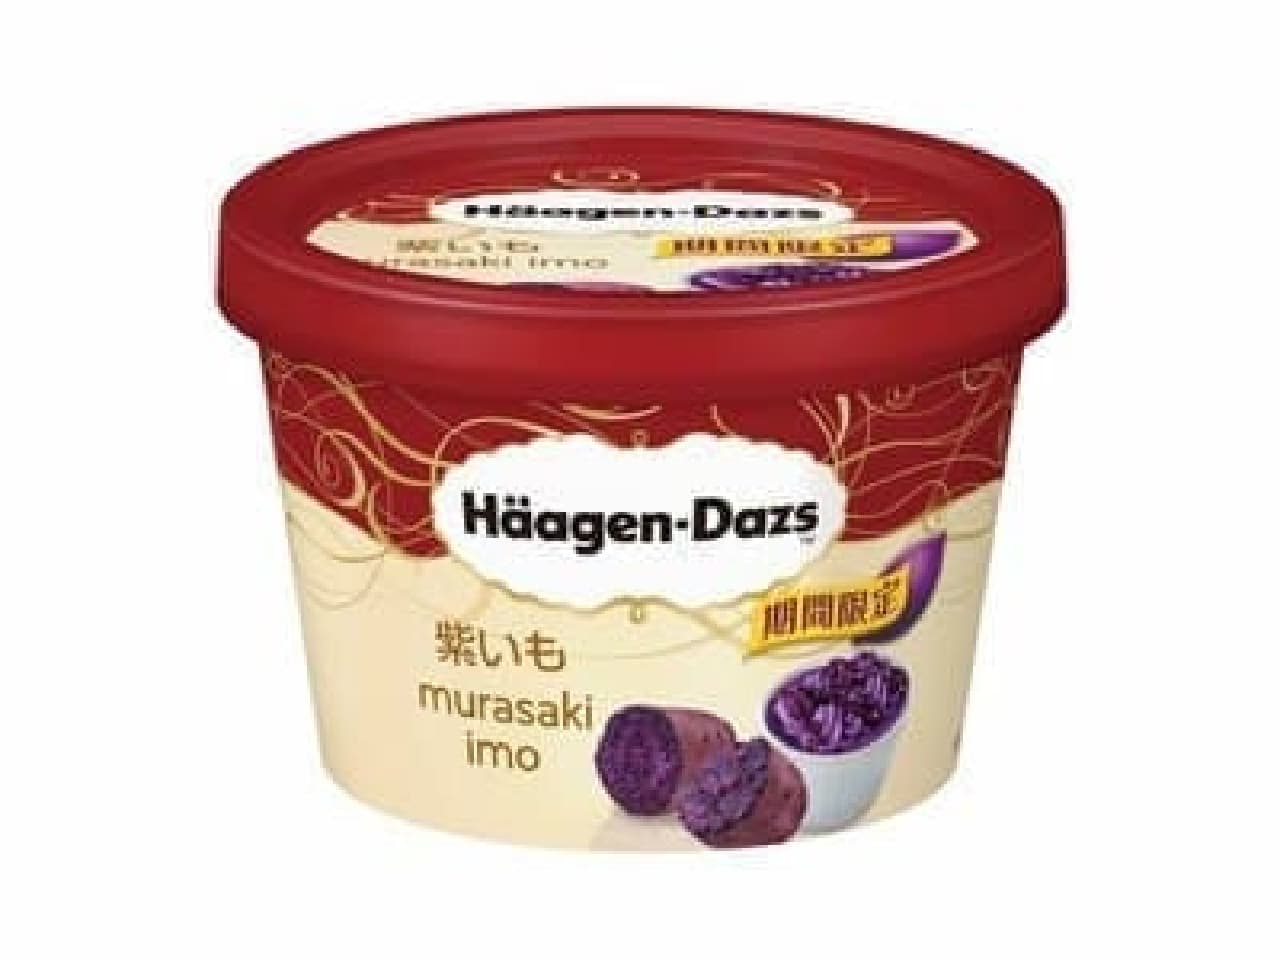 A limited-time flavor "Purple potato" is now available in Haagen-Dazs!